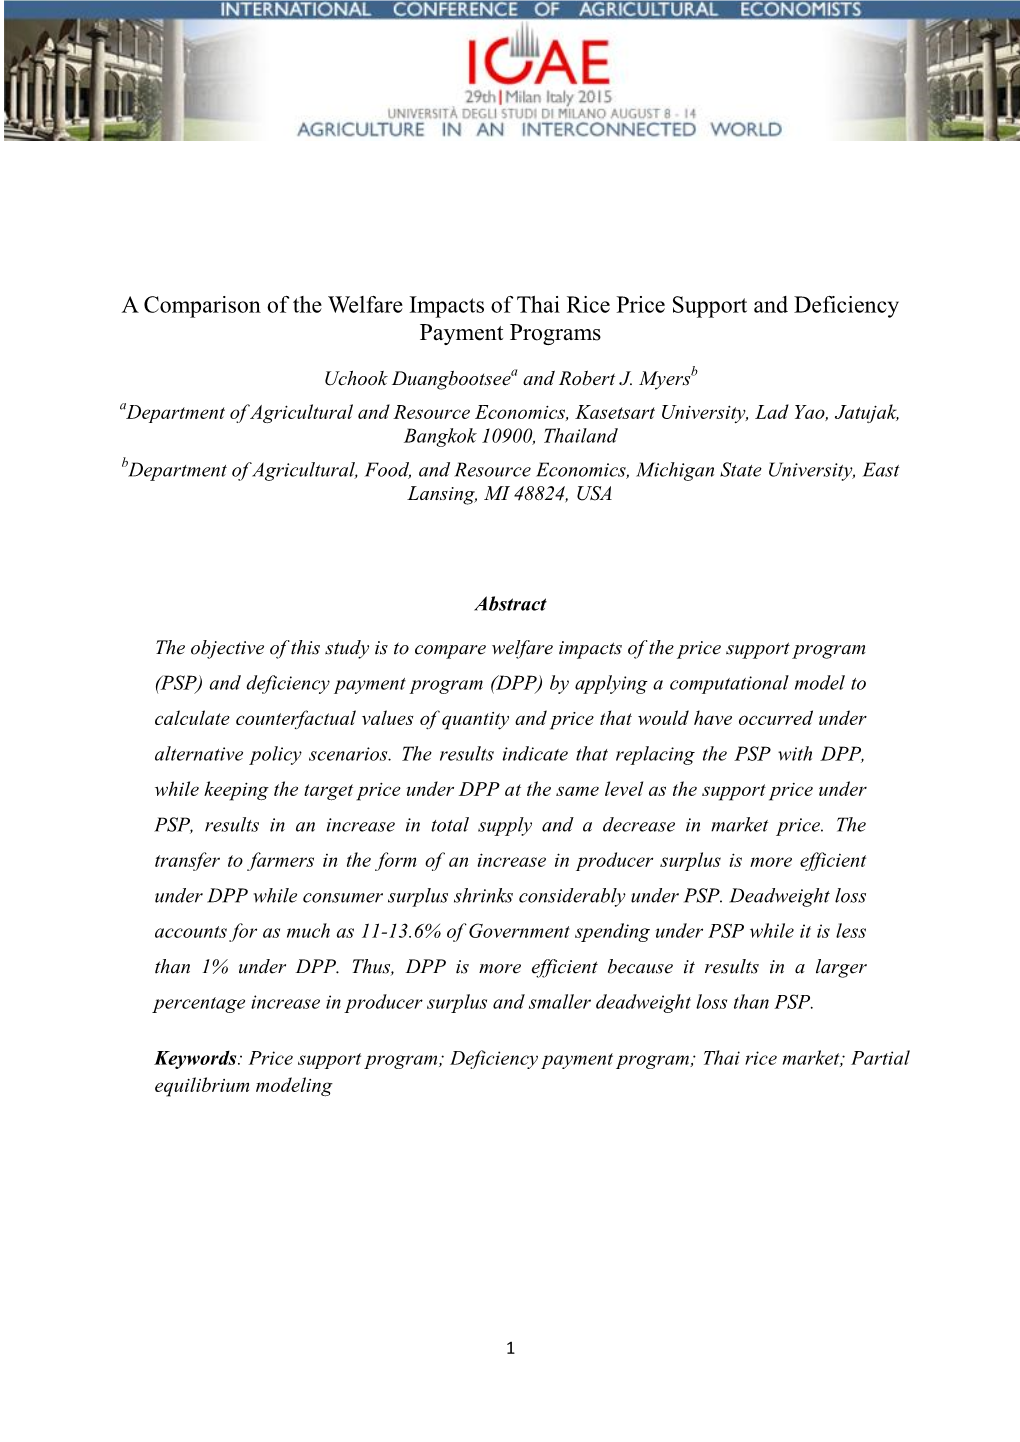 A Comparison of the Welfare Impacts of Thai Rice Price Support and Deficiency Payment Programs